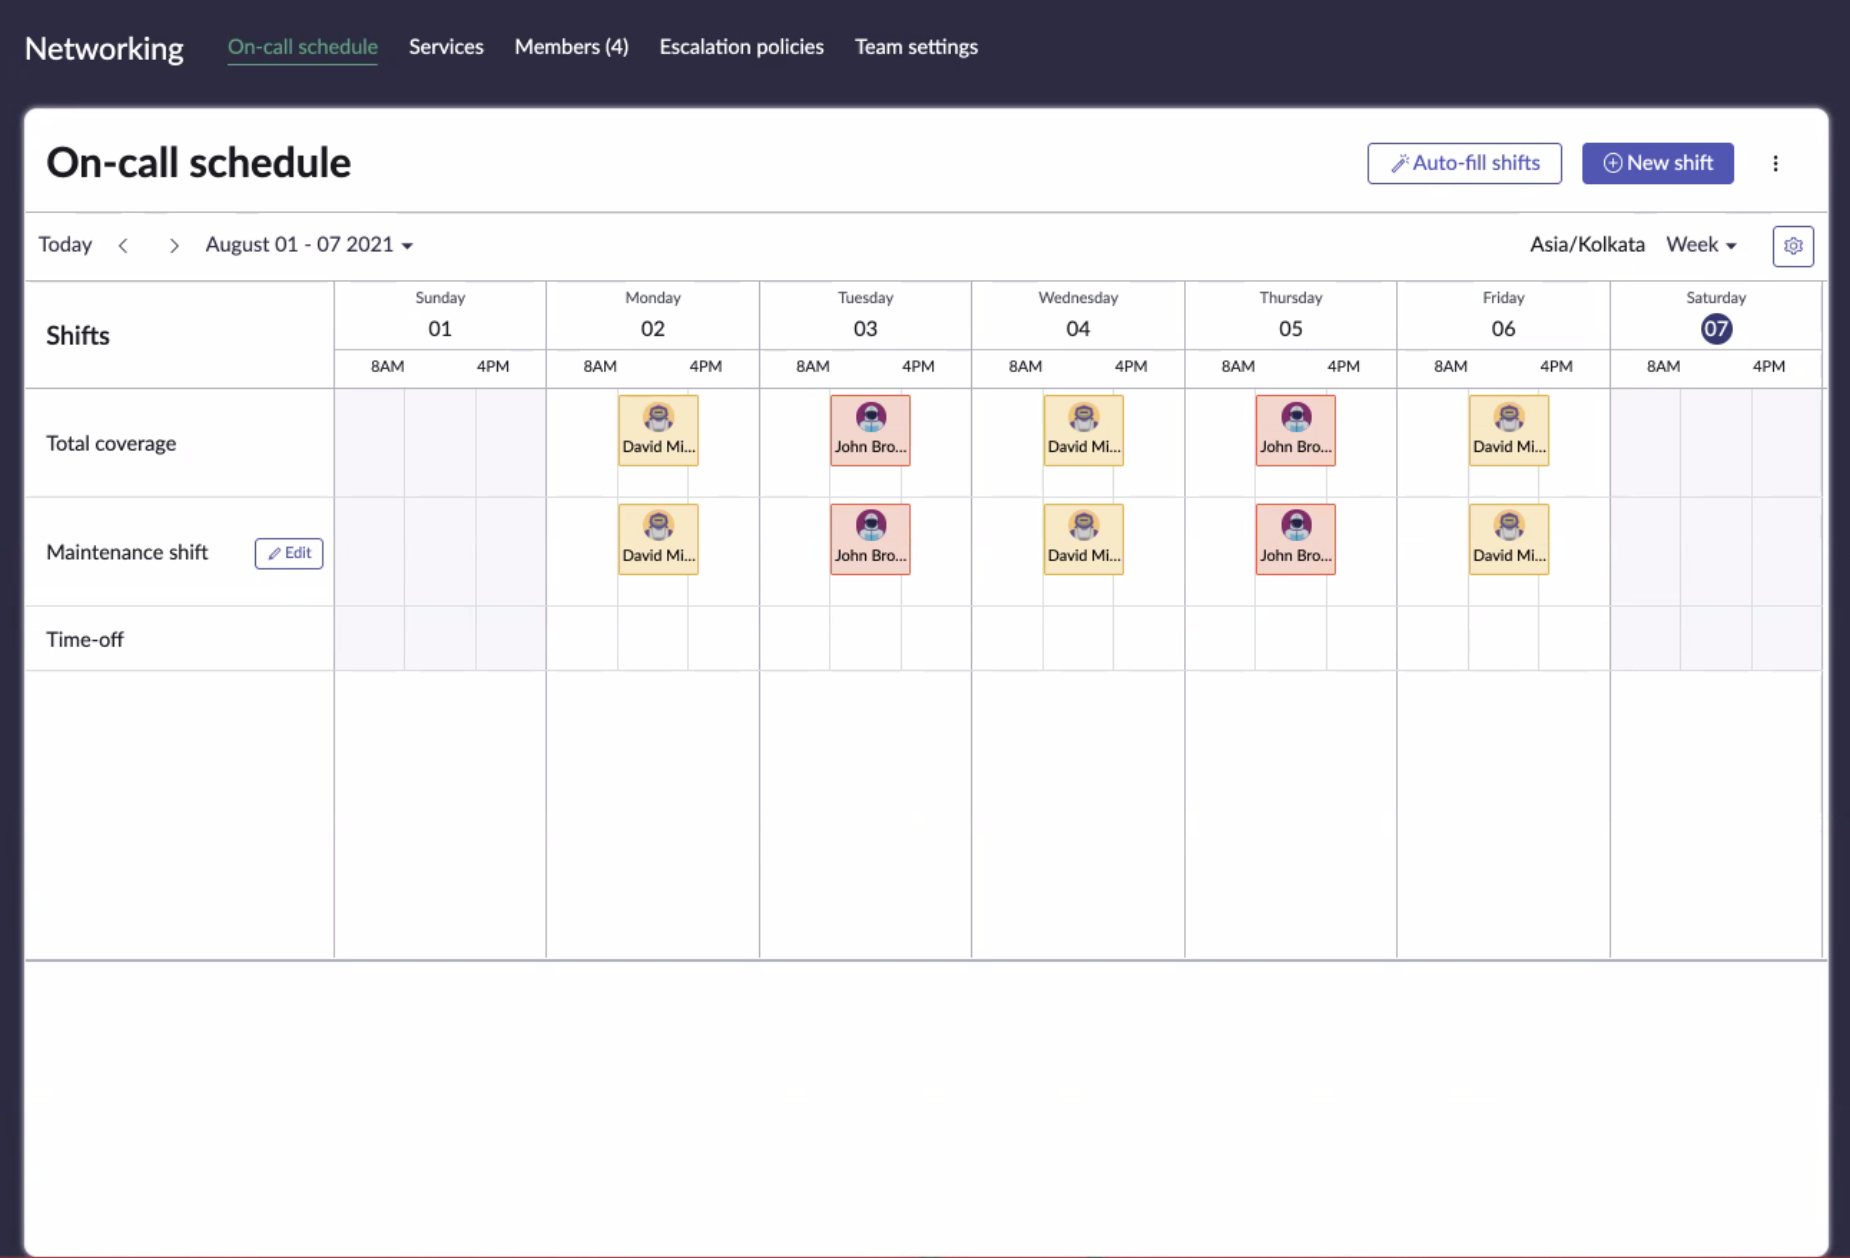 View on-call schedule page for the team.